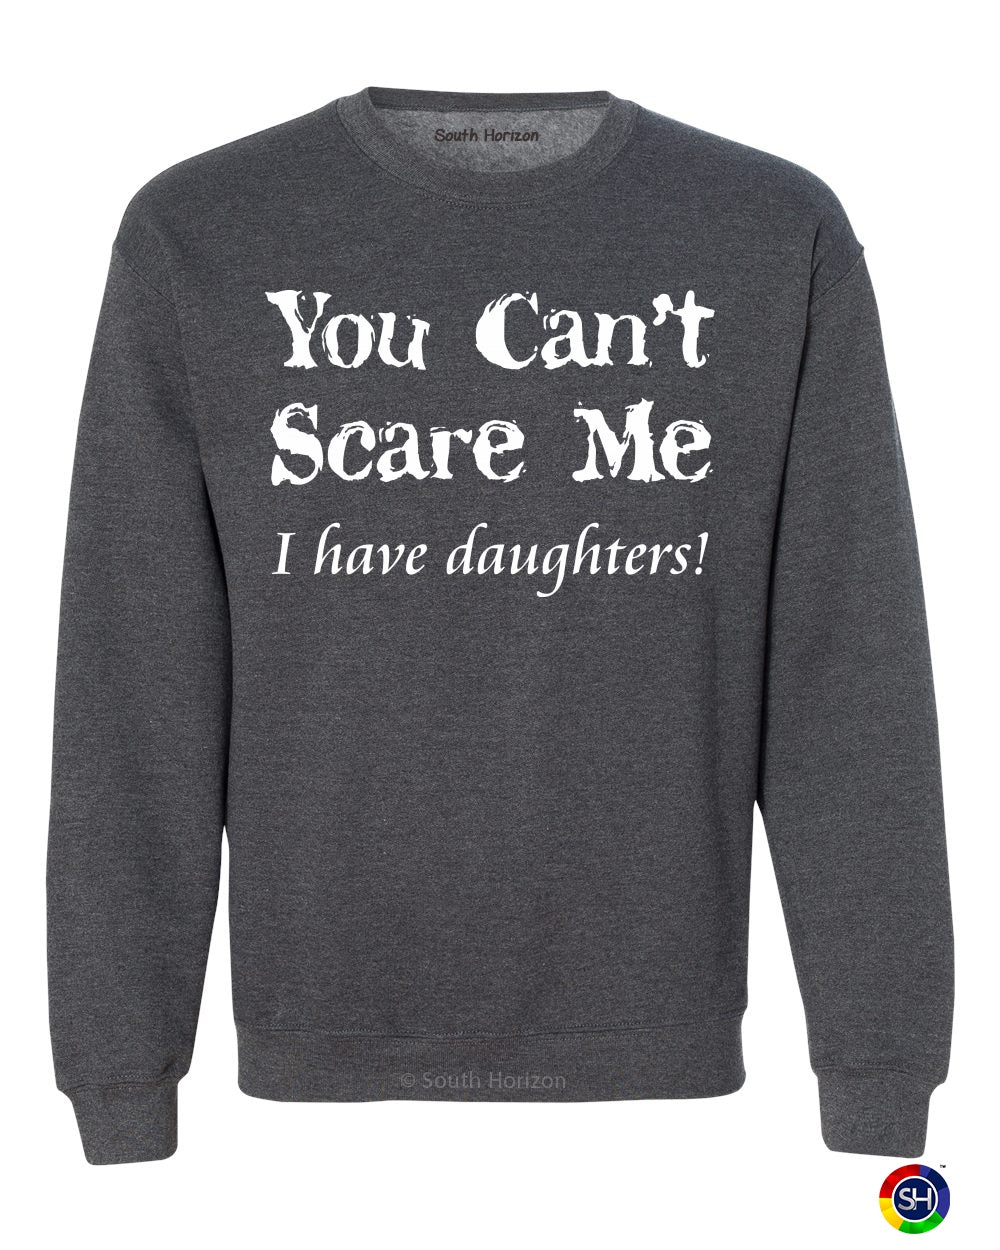 You Can't Scare Me, I have Daughters! on SweatShirt (#763-11)